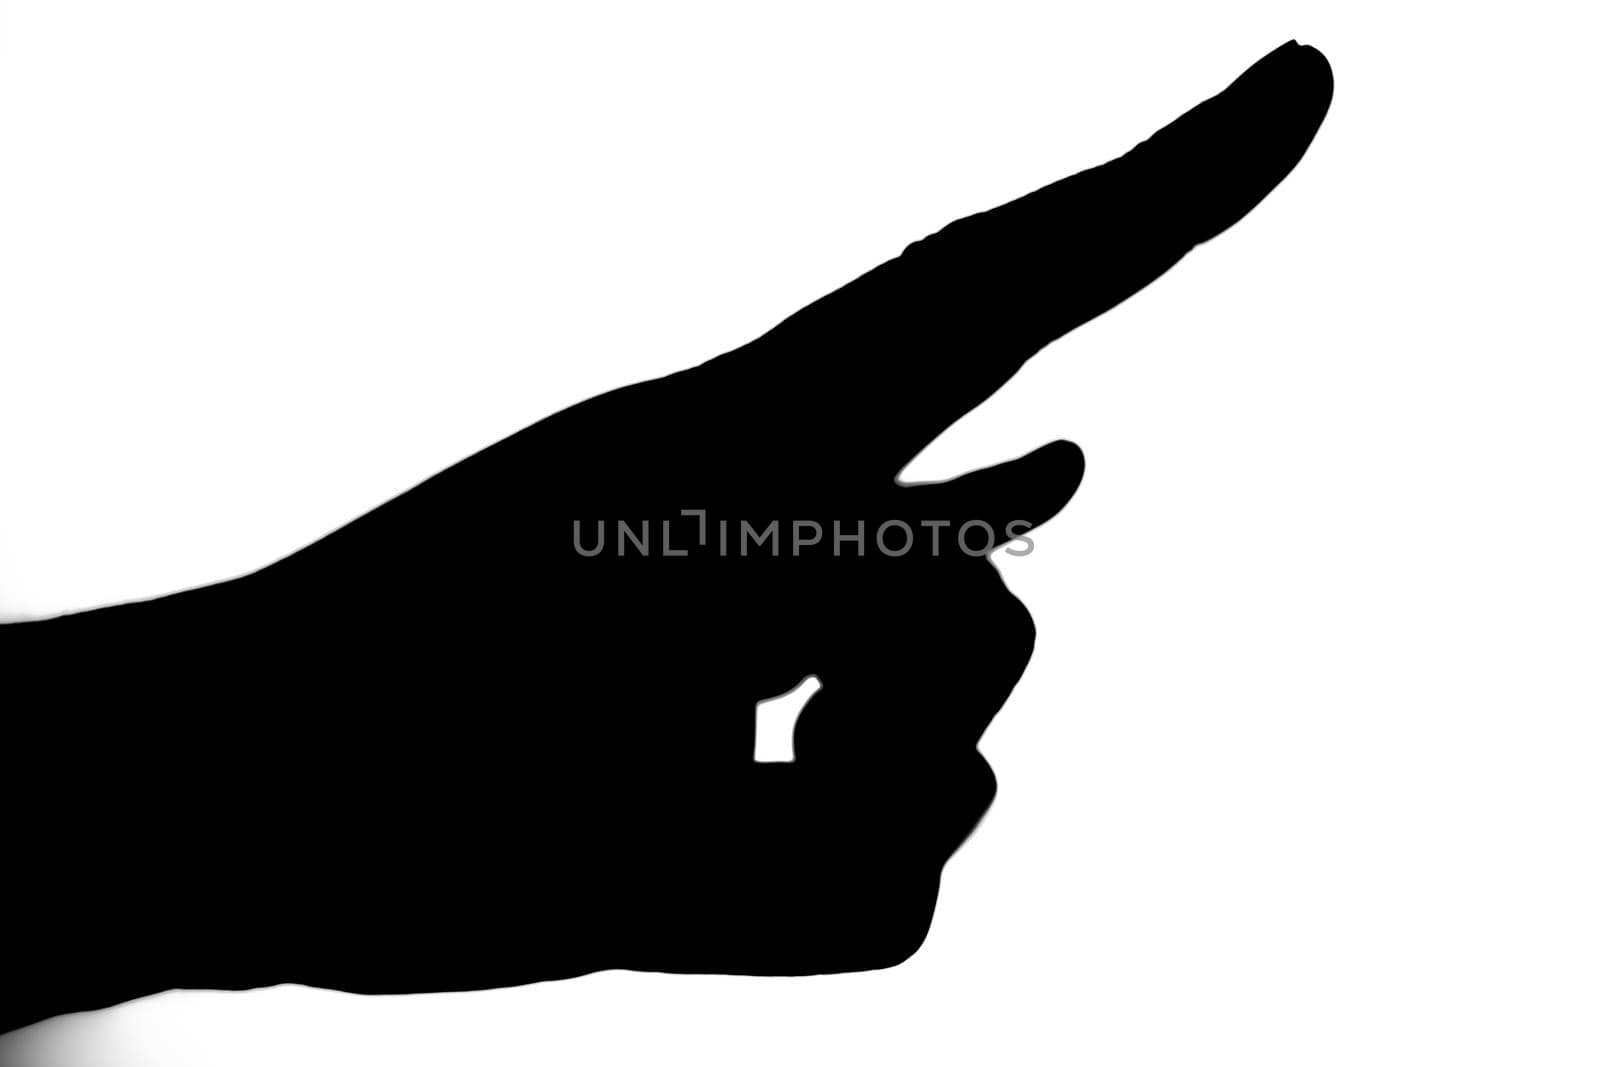 Freehand black silhouette depicting a bull on a white background.